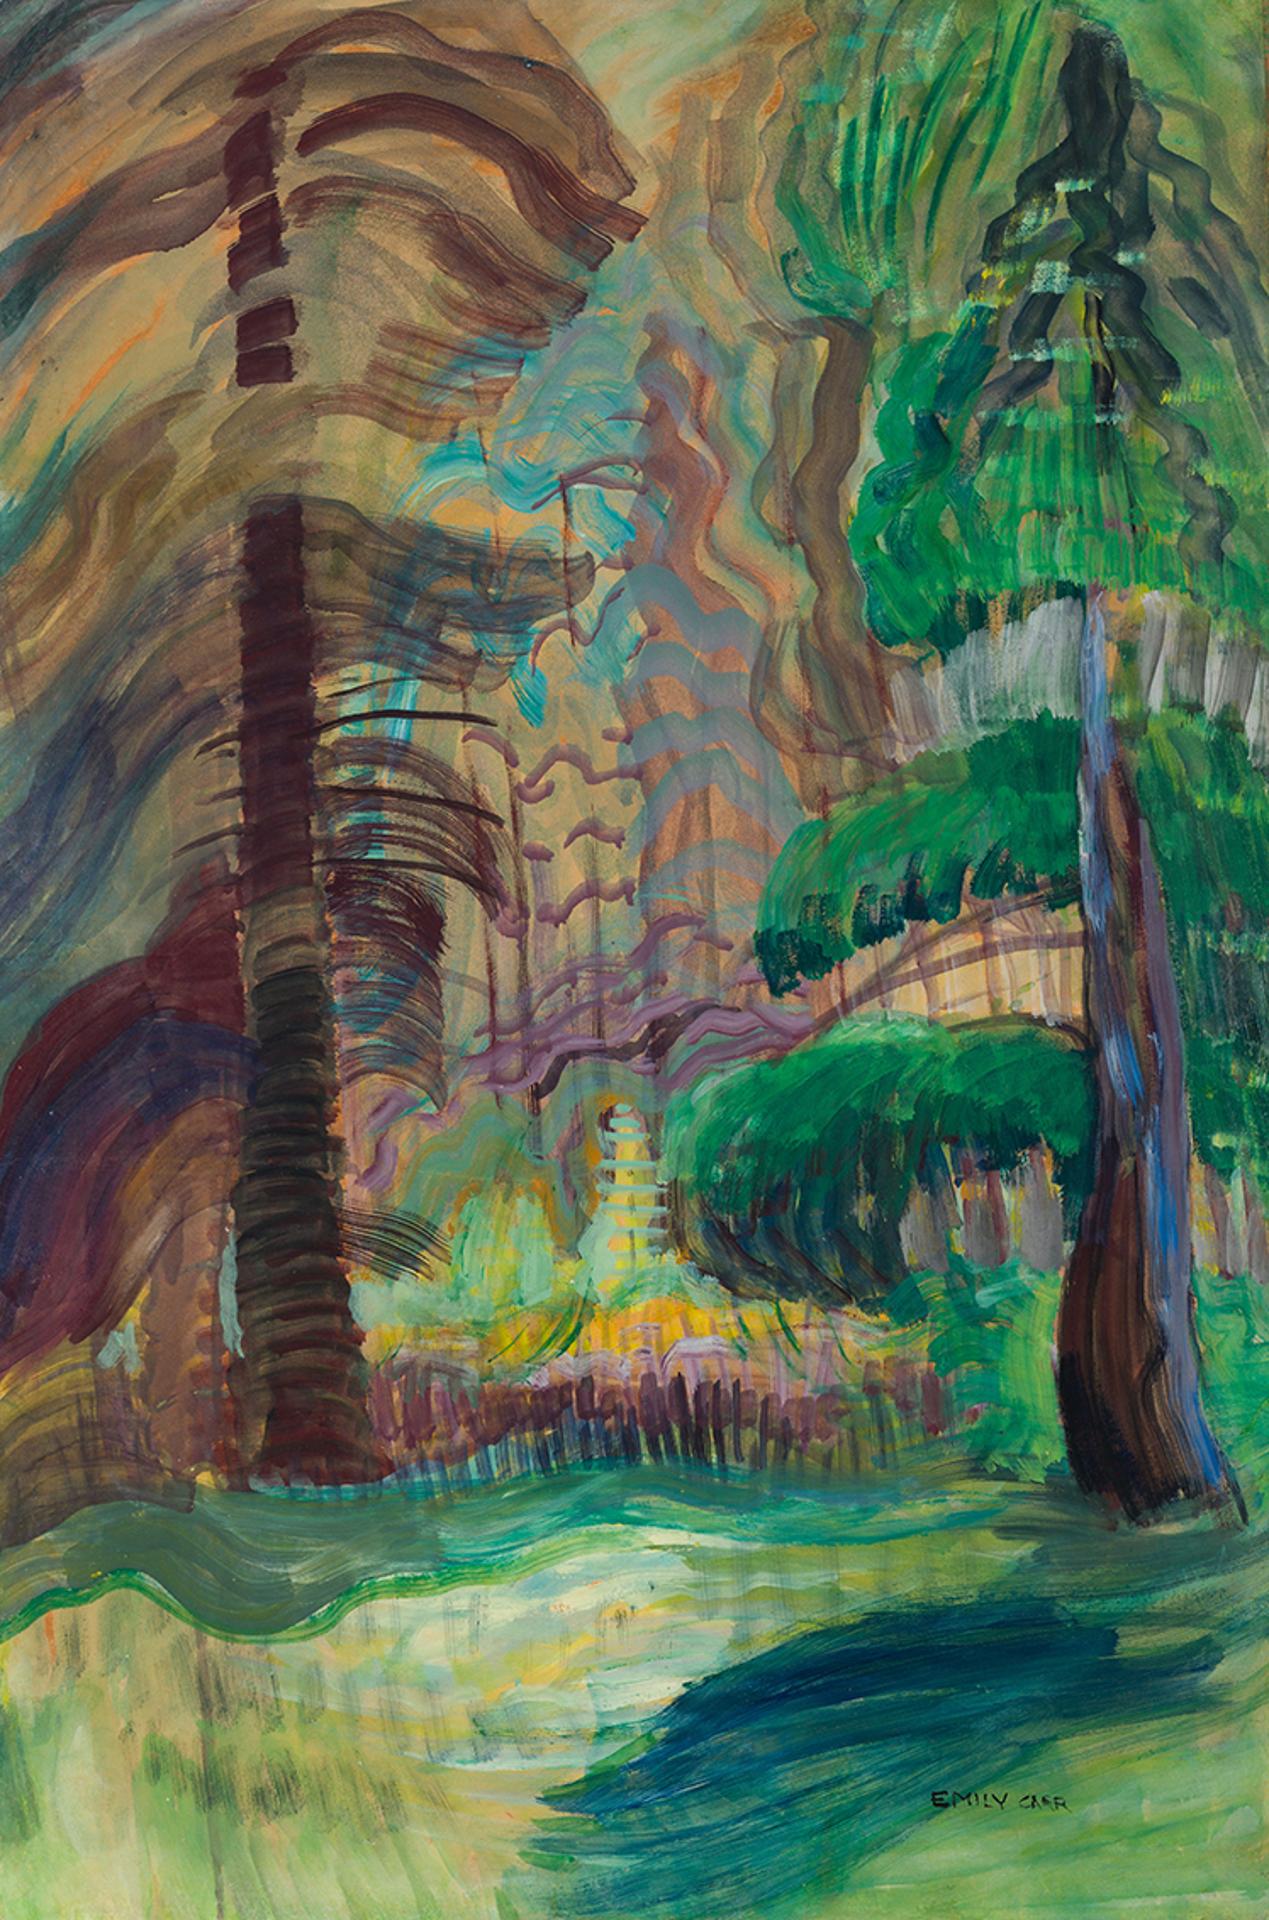 Emily Carr (1871-1945) - Music in the Trees